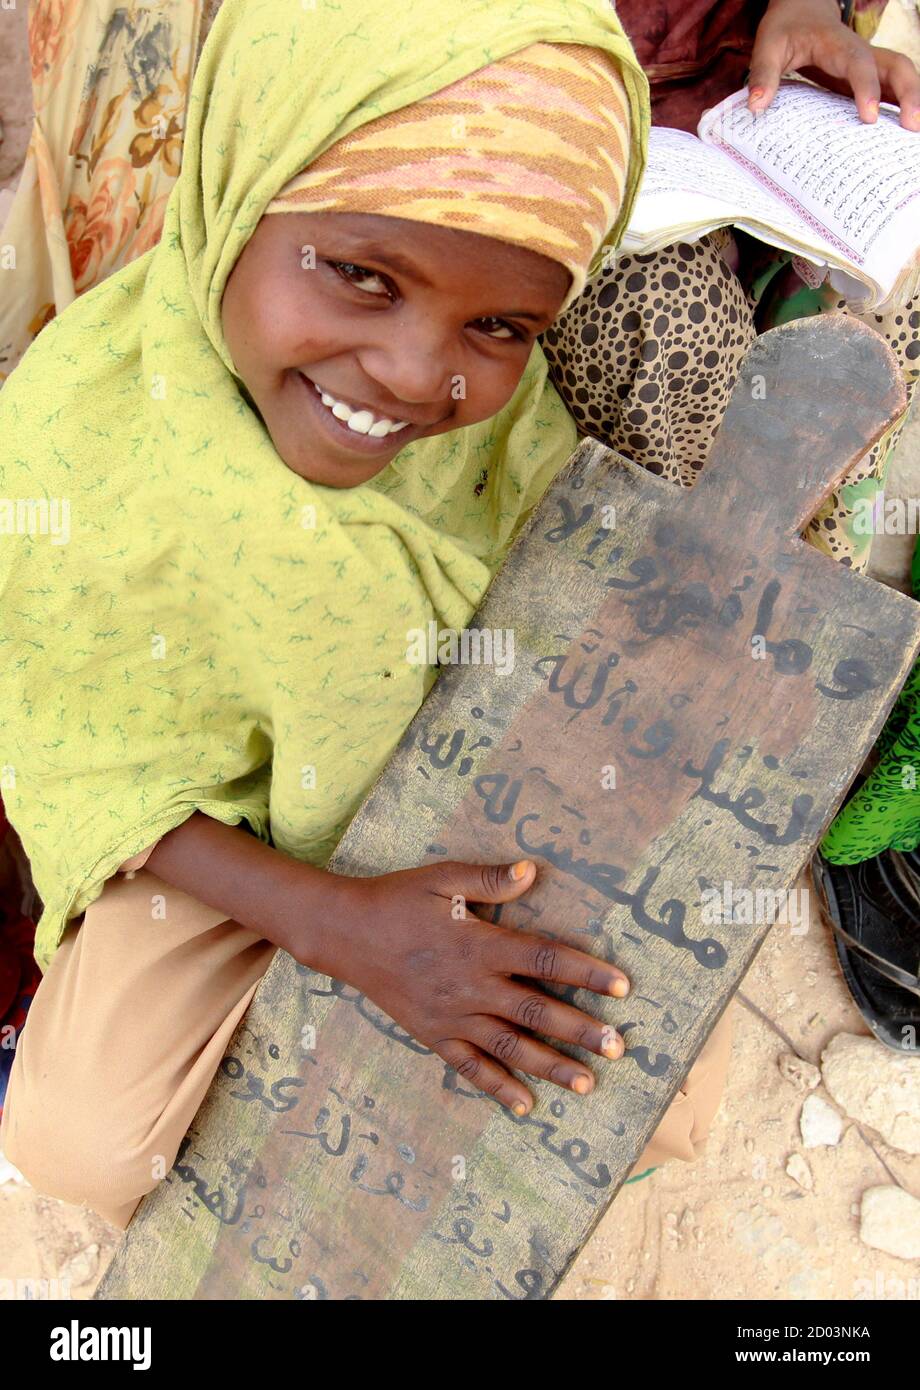 An internally displaced Somali girl attends classes at a Muslim Madrasah (Islamic school) outside a makeshift classroom at the Halabokhad IDP settlement in Galkayo, northwest of Somalia's capital Mogadishu, July 20, 2011. Galkayo hosts over 60,000 internally displaced Somalis in 21 settlements and there are always new arrivals due to the prolonged drought. The United Nations on Wednesday declared famine in two regions of southern Somalia, and warned that this could spread further within two months in the war-ravaged Horn of Africa country unless donors step in. REUTERS/Thomas Mukoya (SOMALIA - Stock Photo